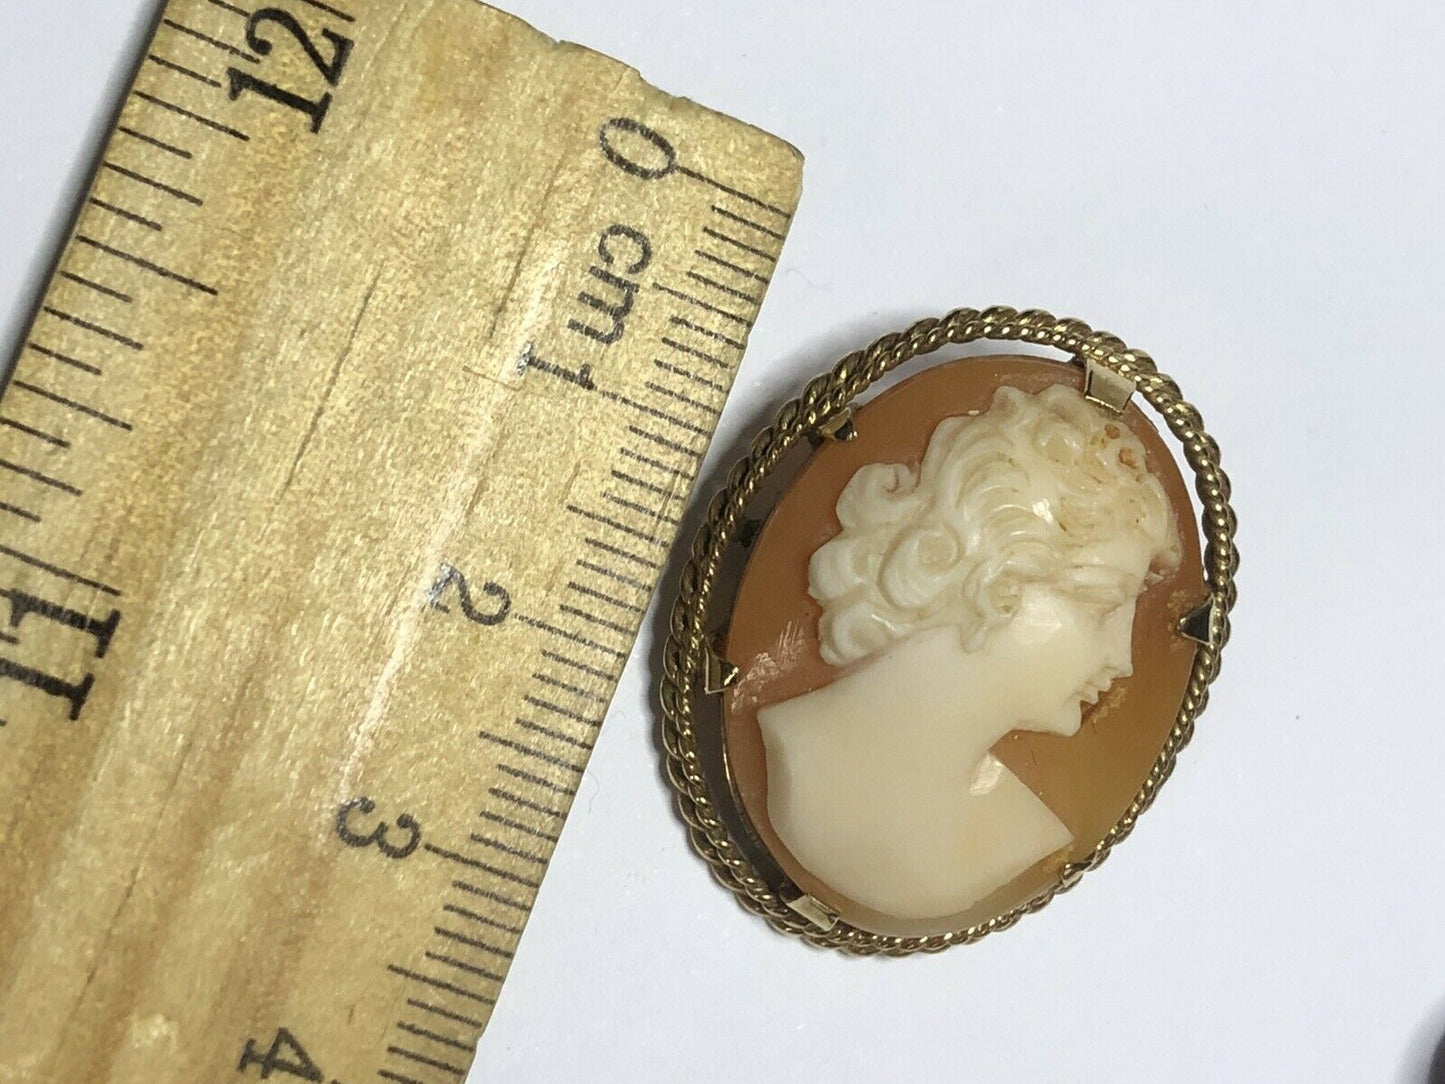 Vintage 9ct Gold Shell Carved Cameo Brooch